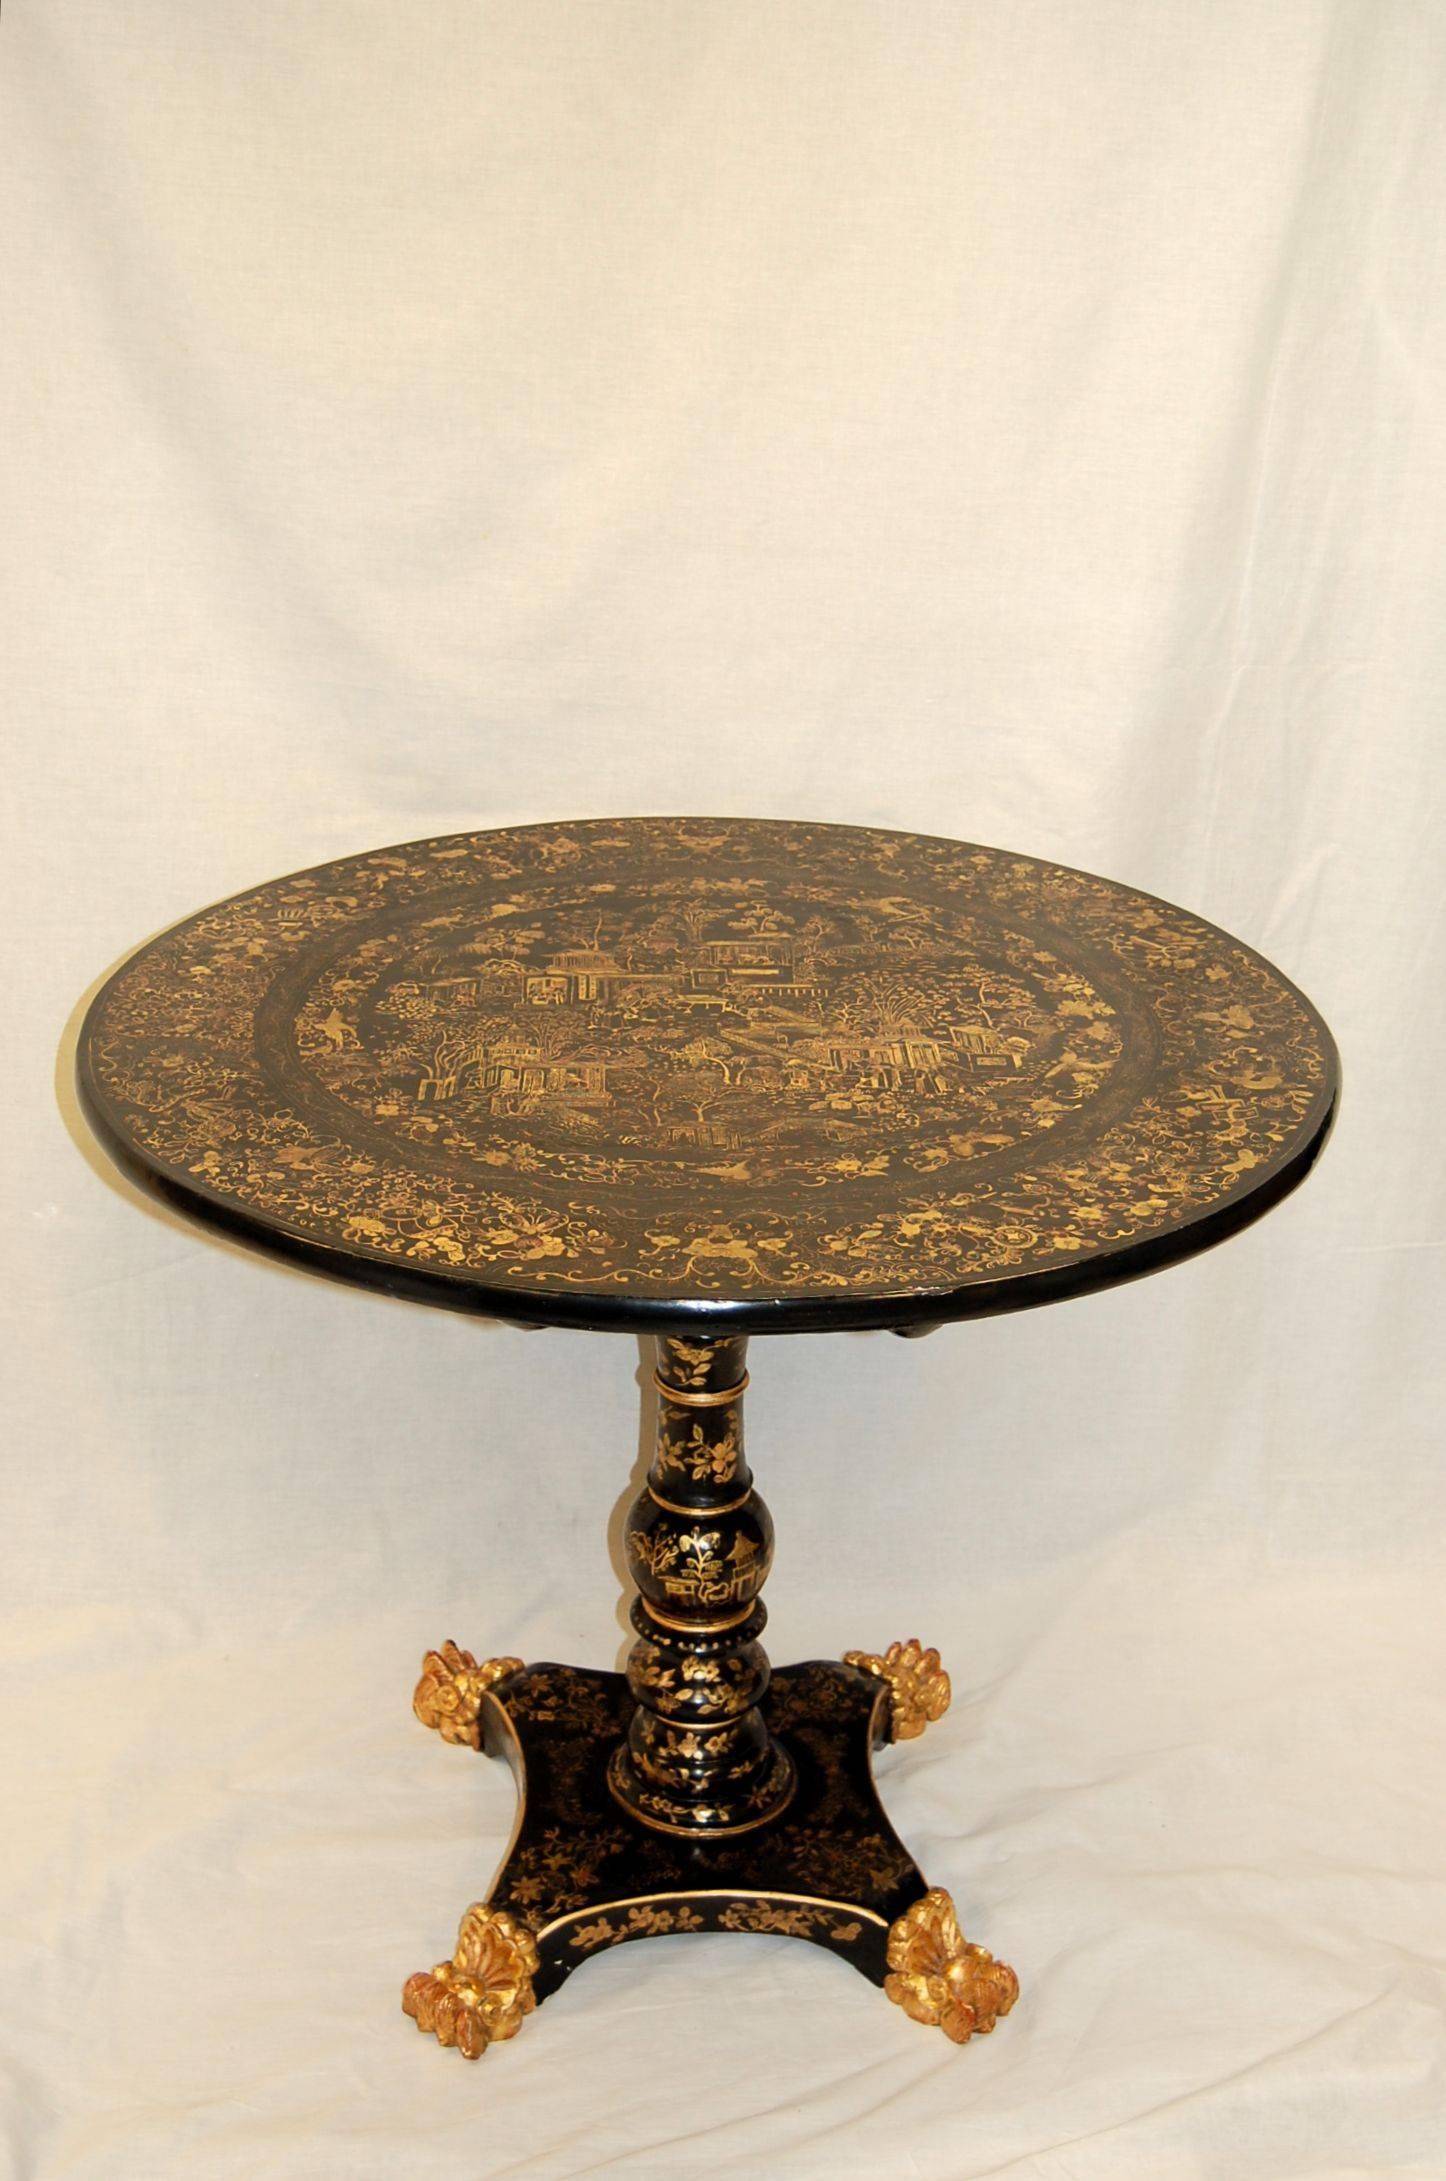 Regency Early 19th Century English Japanned Circular Tilt-Top Dessert Table For Sale